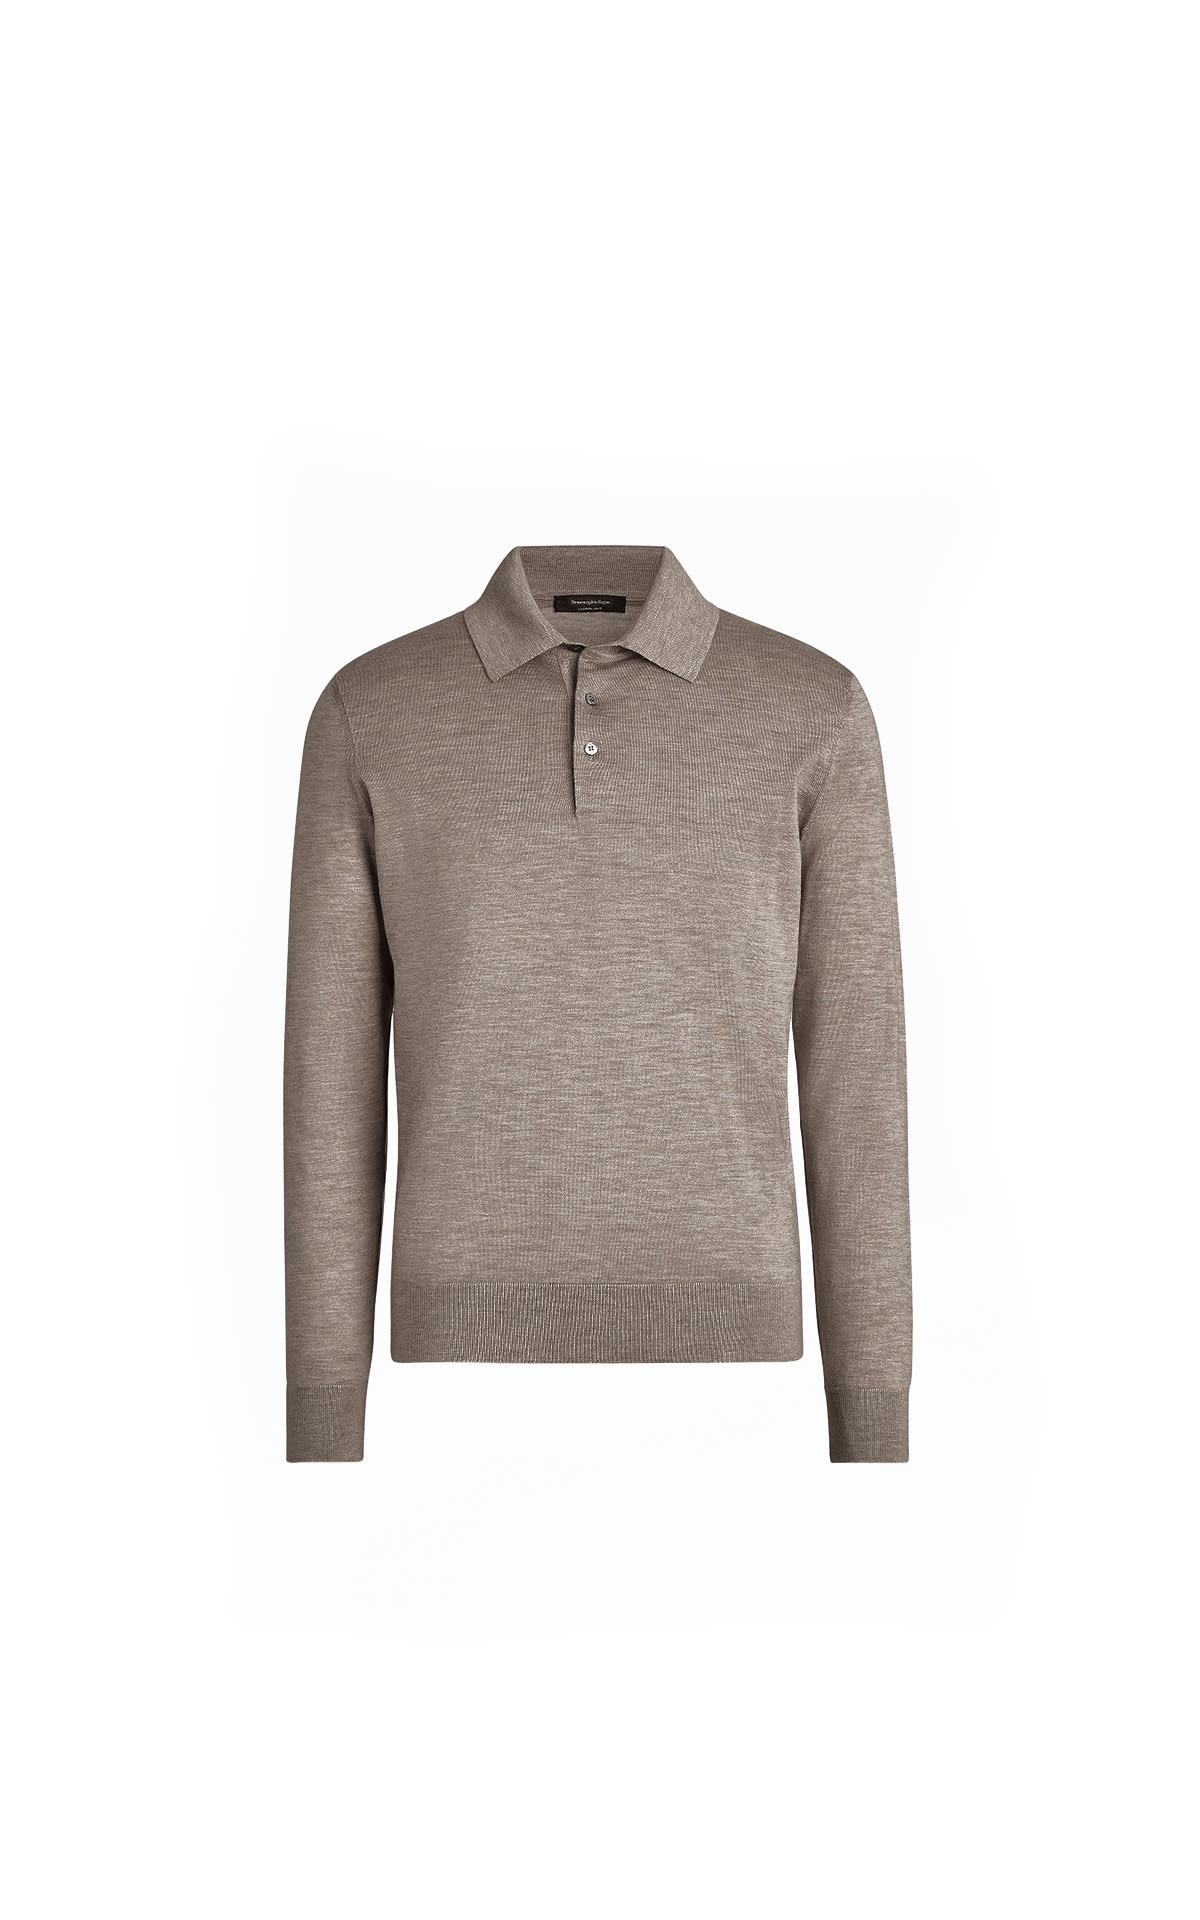 Zegna Brown cashmere polo sweater with buttons